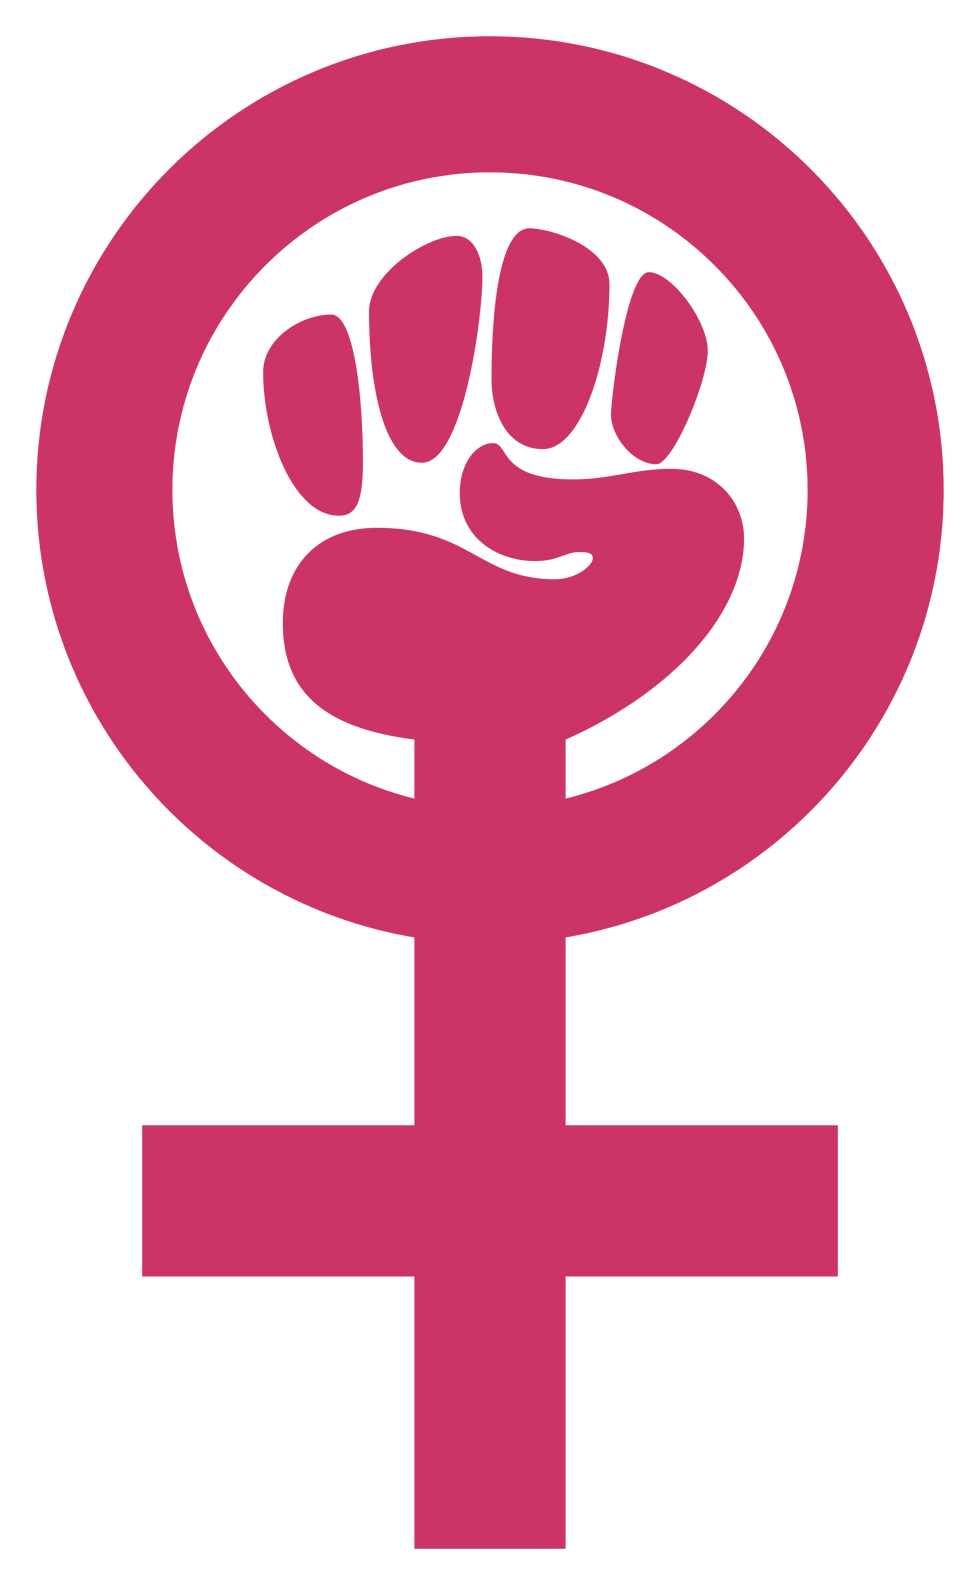 Understanding the Meaning of Feminism